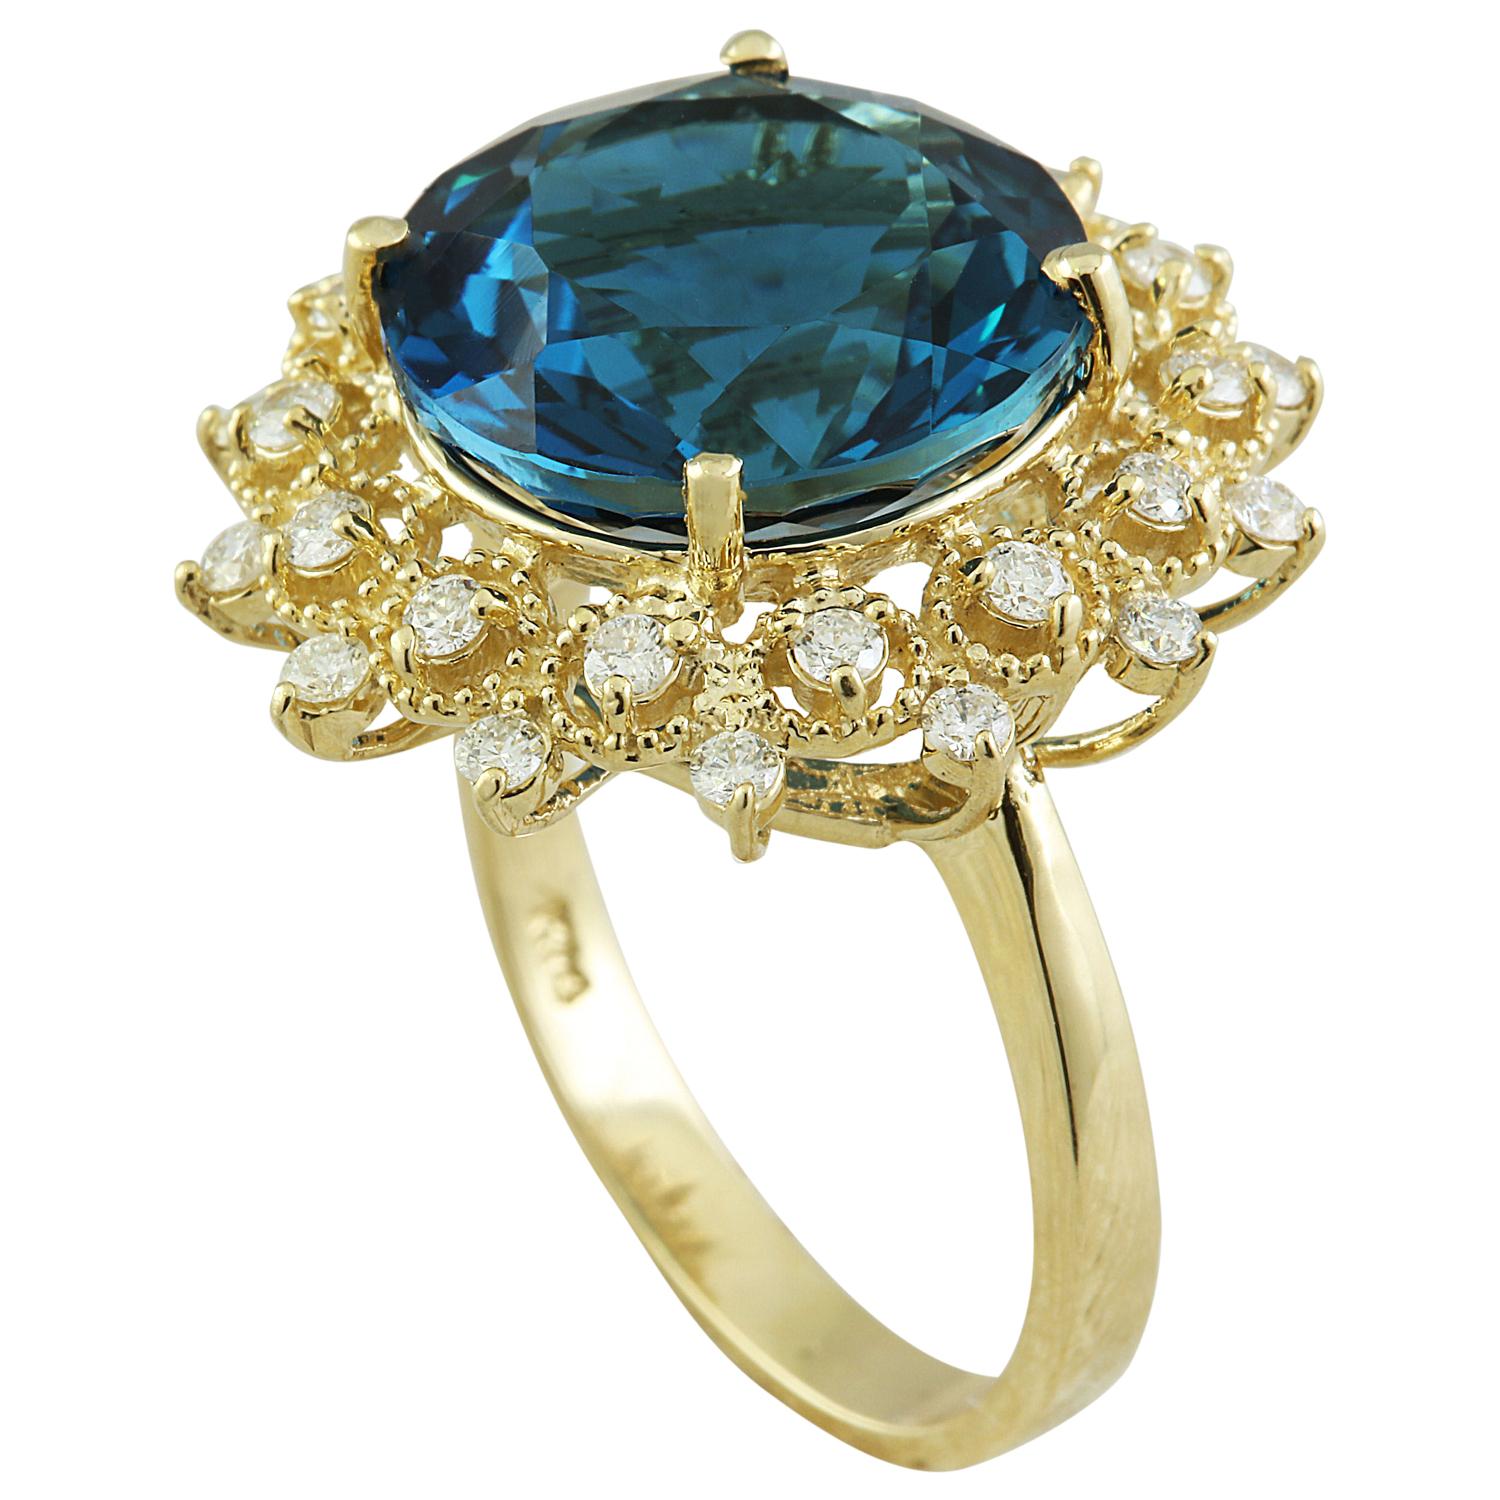 10.00 Carat Natural Topaz 14 Karat Solid Yellow Gold Diamond Ring
Stamped: 14K 
Ring Size: 7 
Total Ring Weight: 5.1 Grams
Topaz Weight: 9.50 Carat (13.00x13.00 Millimeter) 
Diamond Weight: 0.50 Carat (F-G Color, VS2-SI1 Clarity)
Quantity: 28
Face